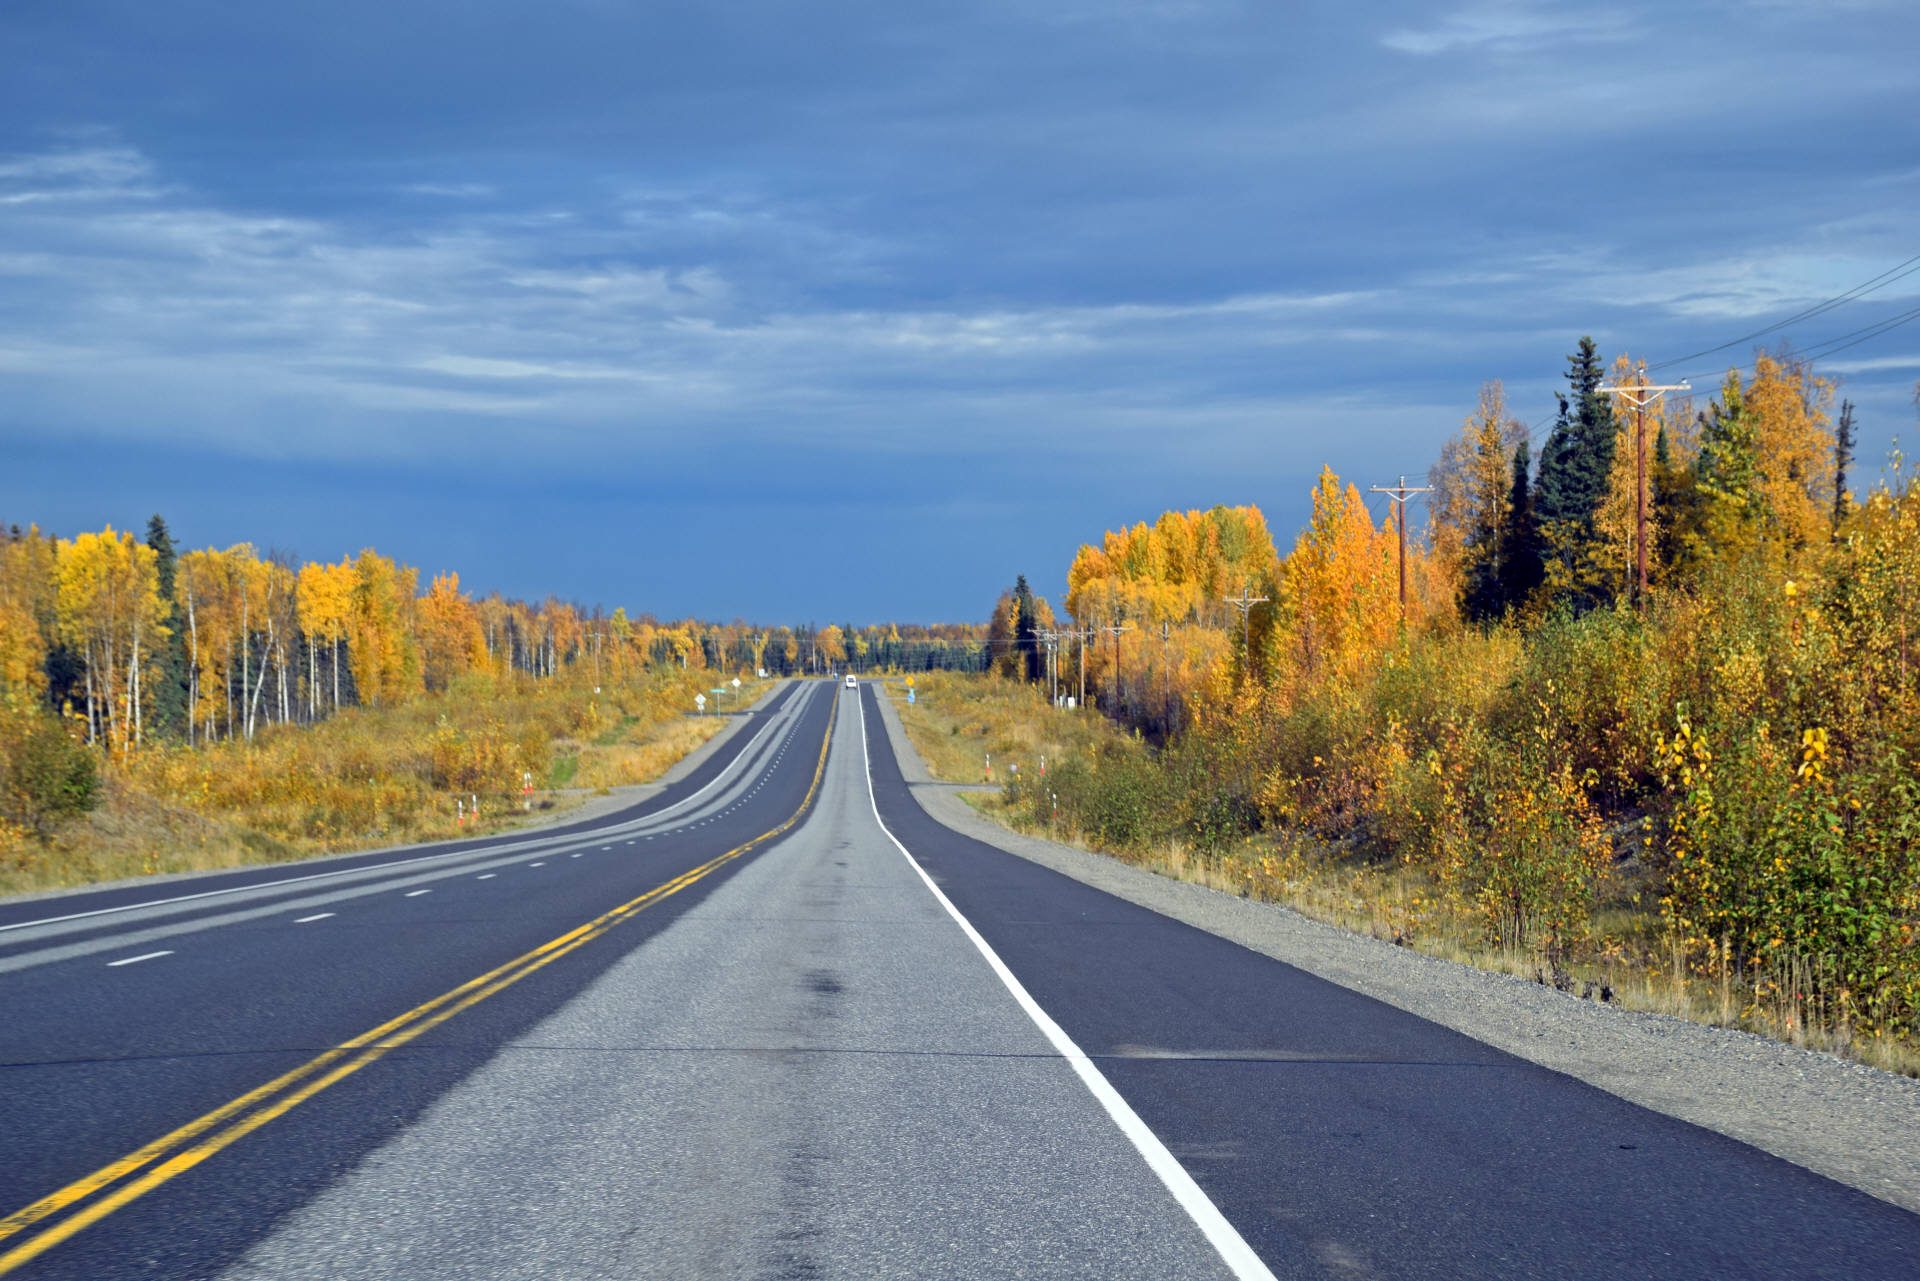 Part of Parks Highway with three lanes near Willow, Alaska. Photo: Fyodor Soloview.